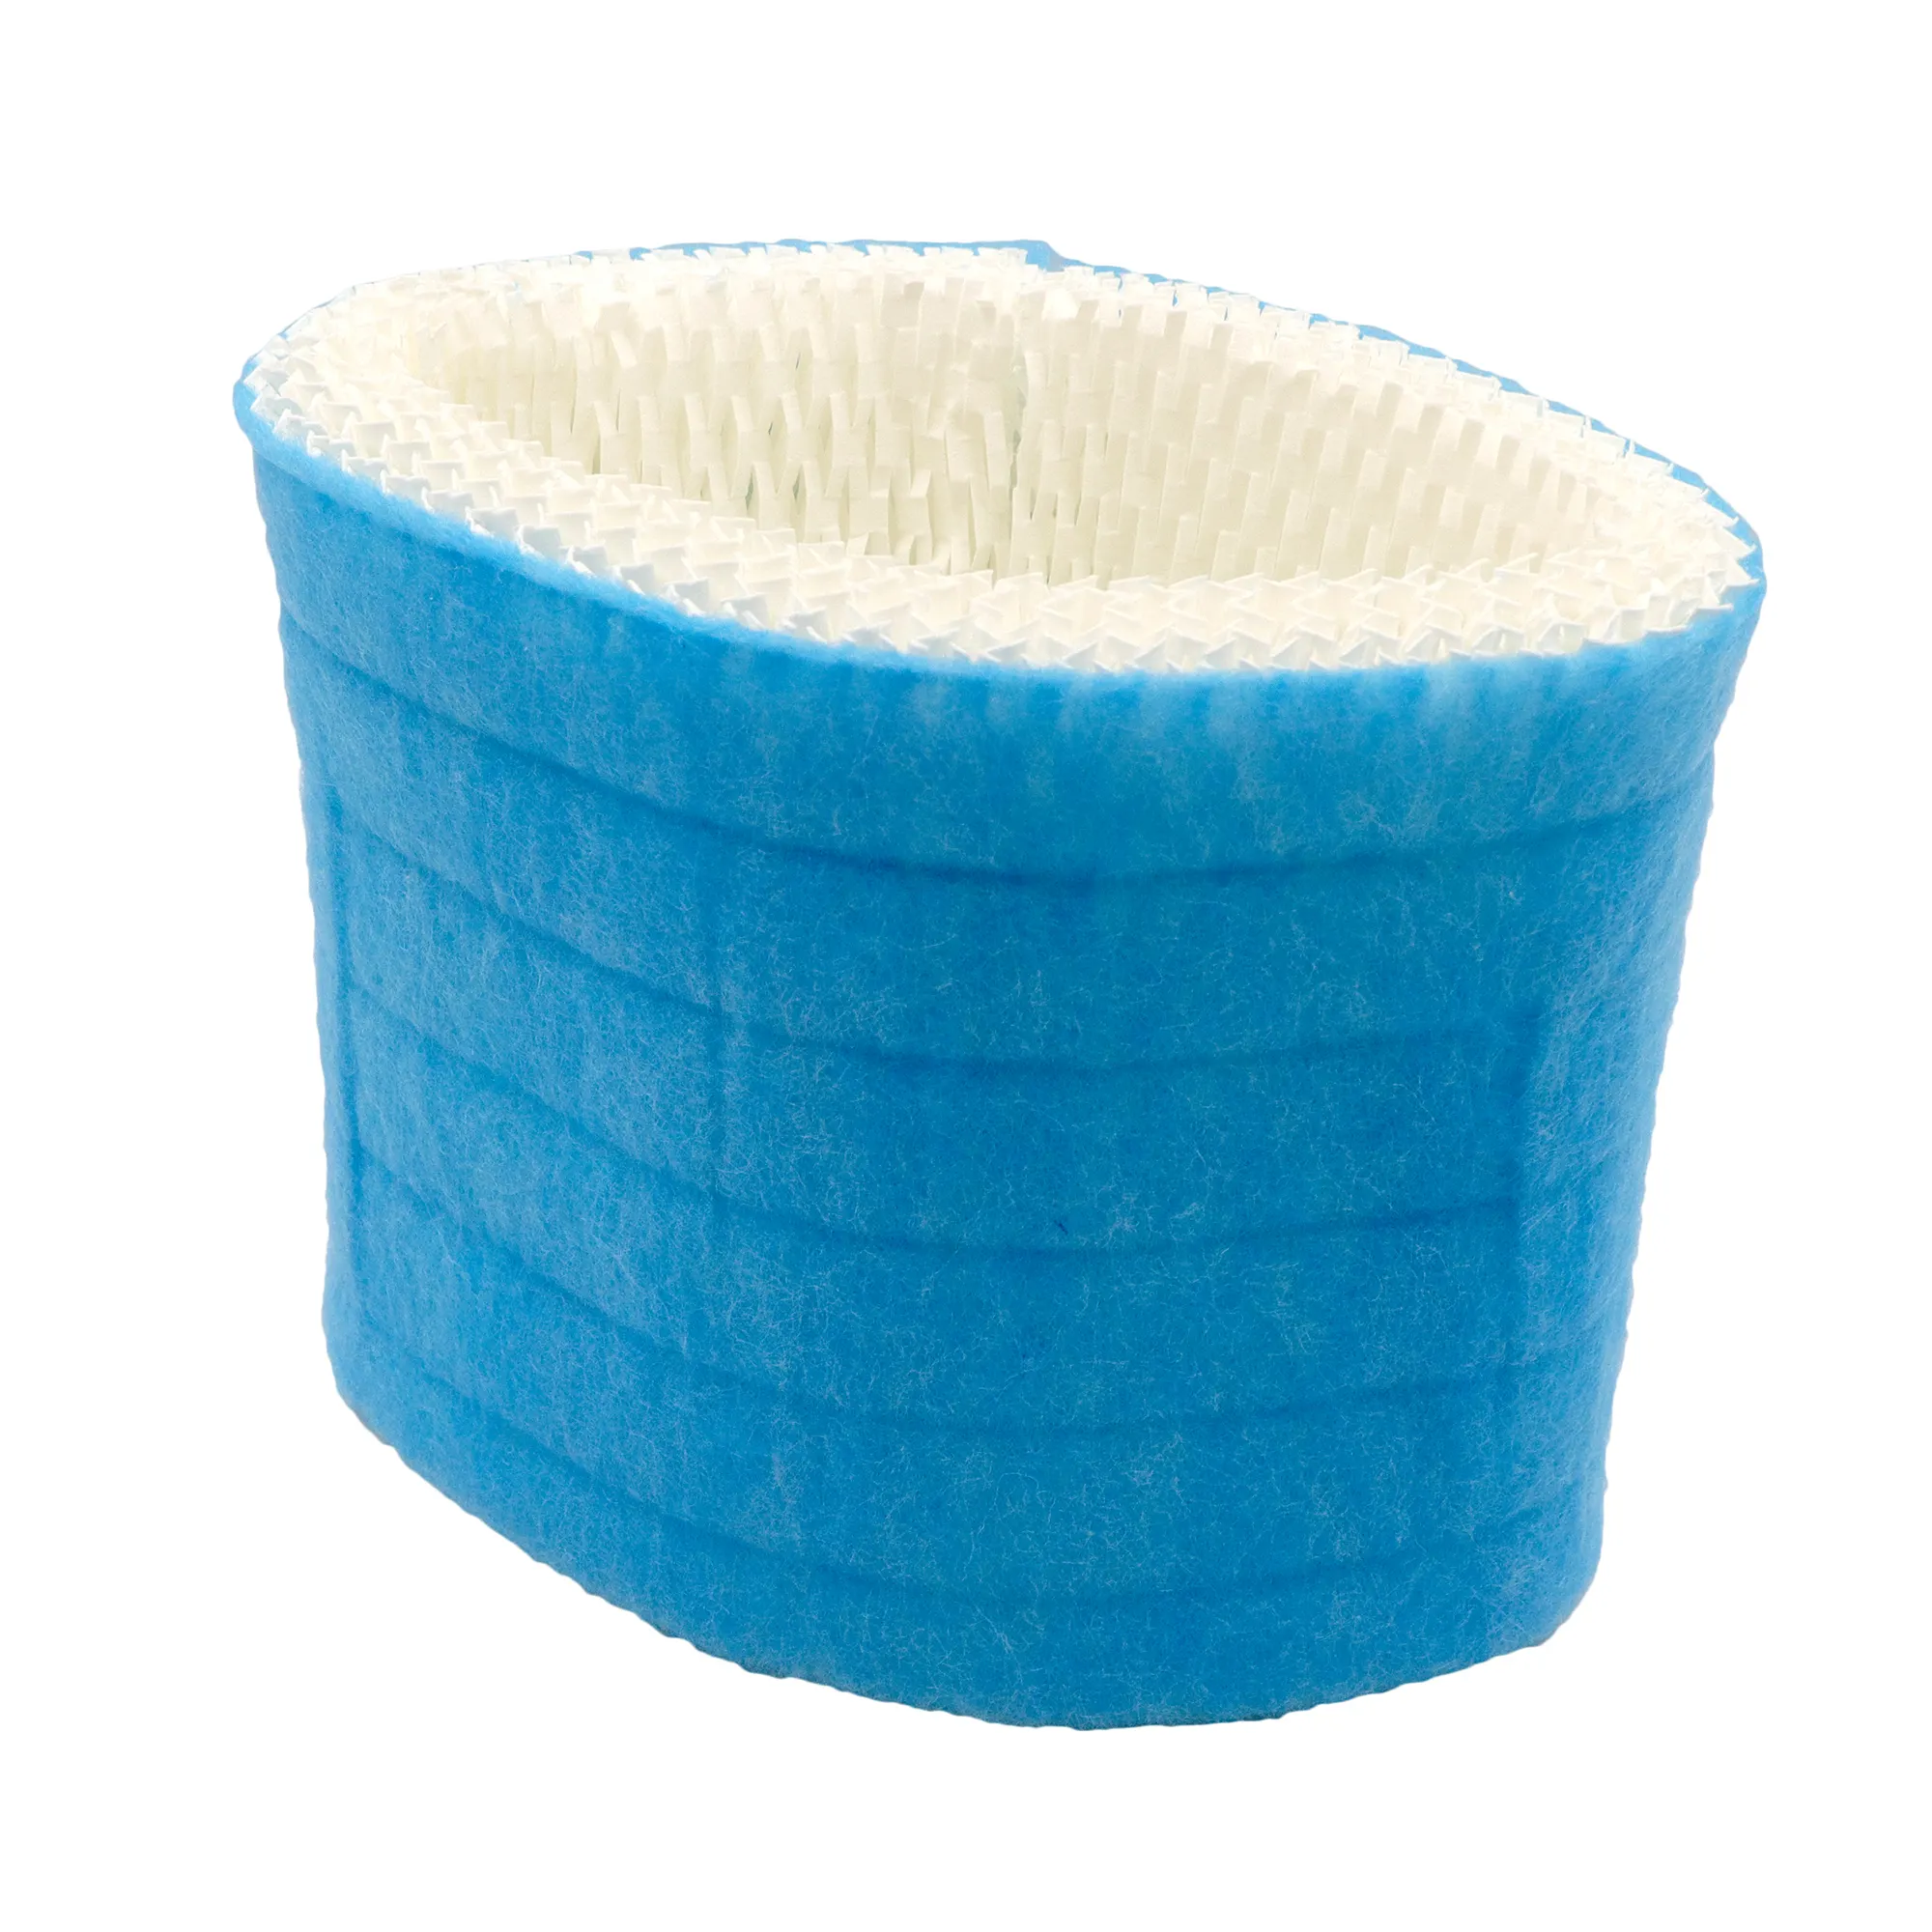 Humidifier Filter Replacement Wicking Filters Compatible with Honey-well HC-888, HC-888N;humidifier parts for Honey-well HC-888